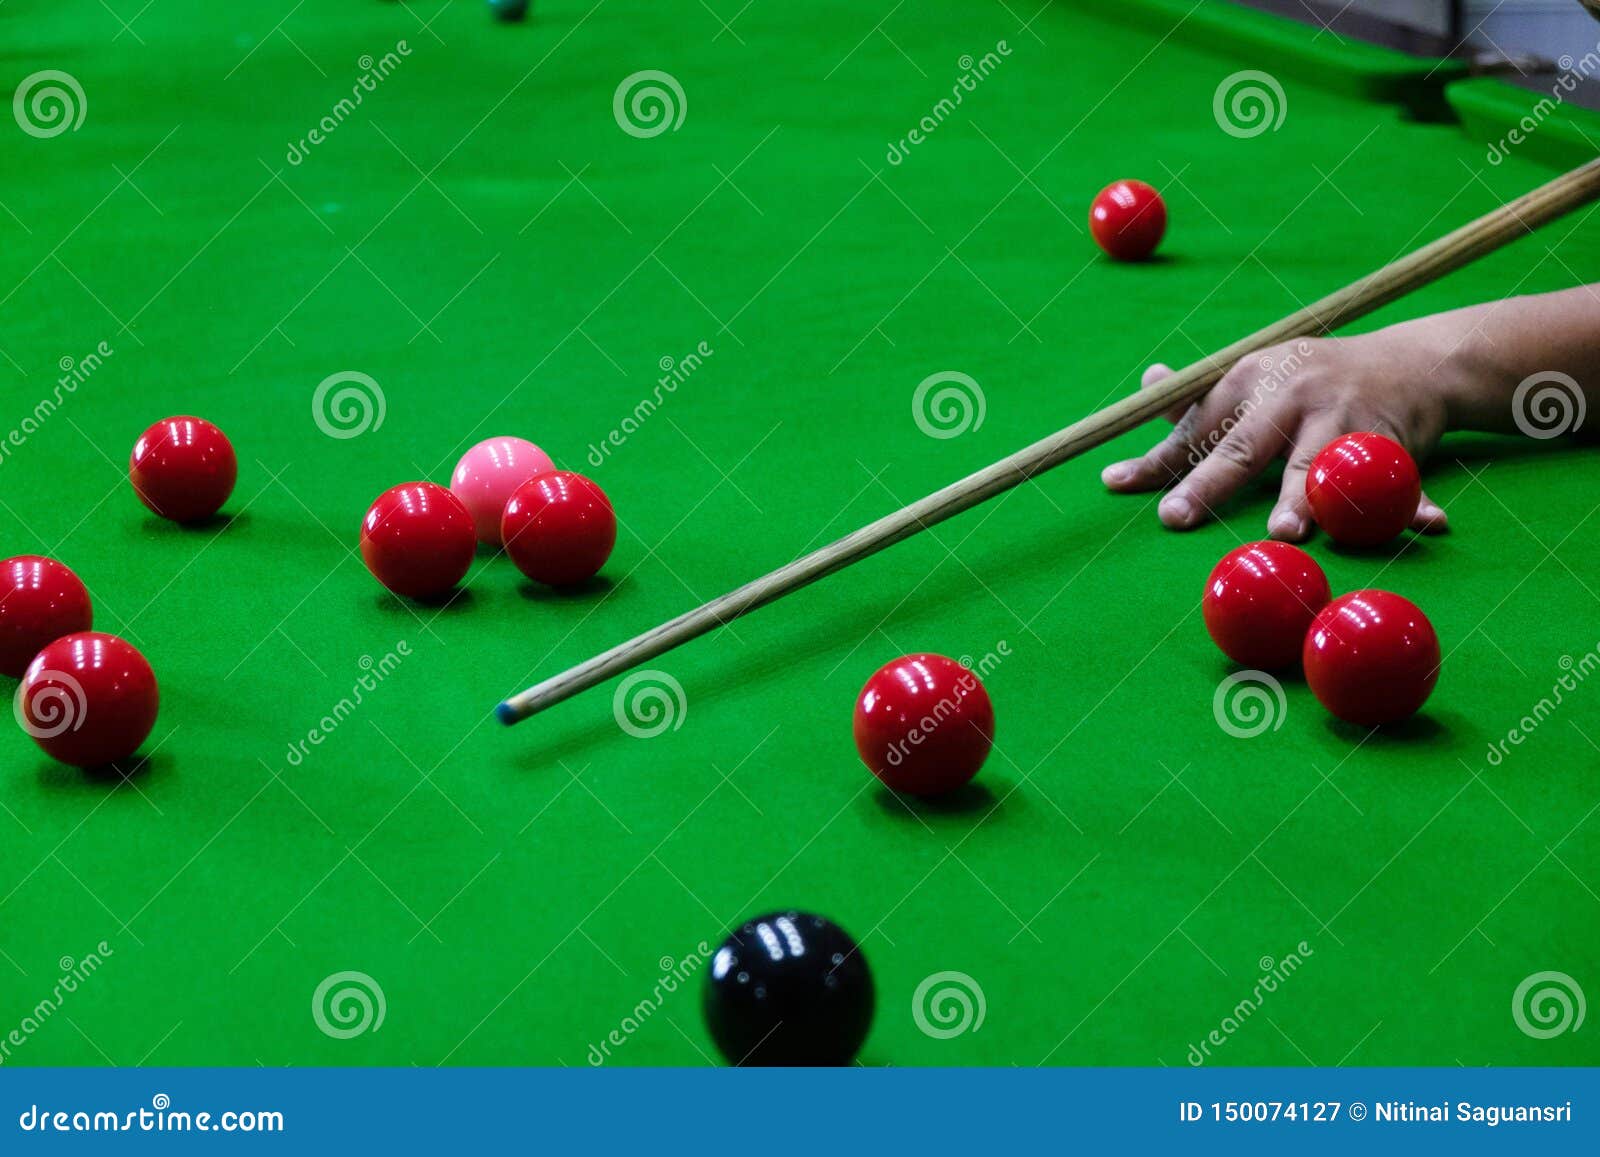 Playing Snooker, Piercing the Red Ball, Black, Aiming the Ball and Pocketing the Hole To Score Points Stock Image